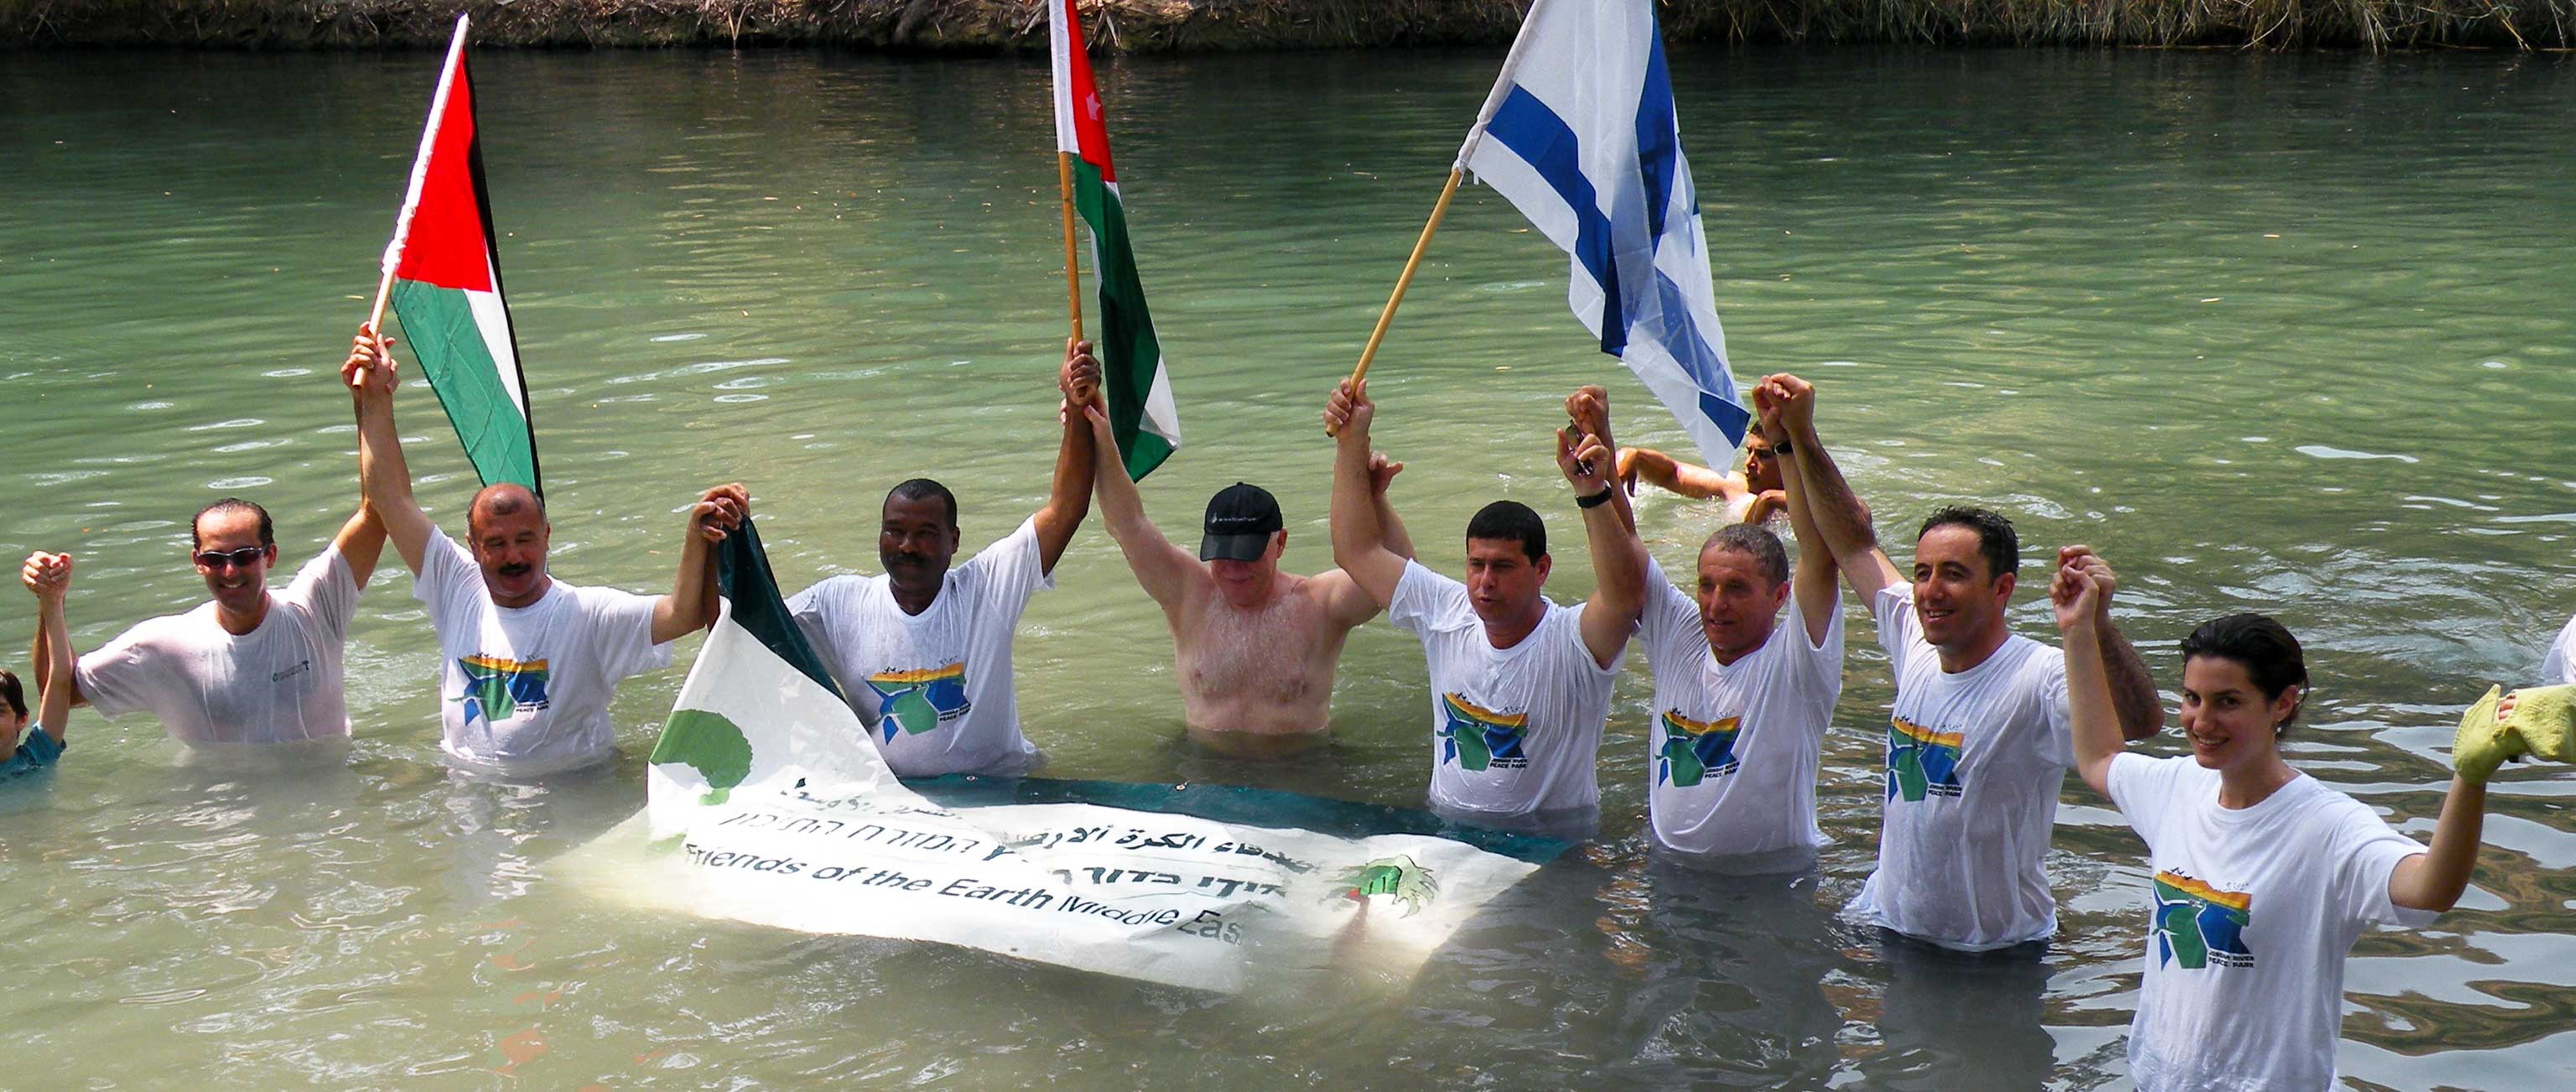 EcoPeace Middle East and a Breakthrough Israeli-Palestinian Water Deal